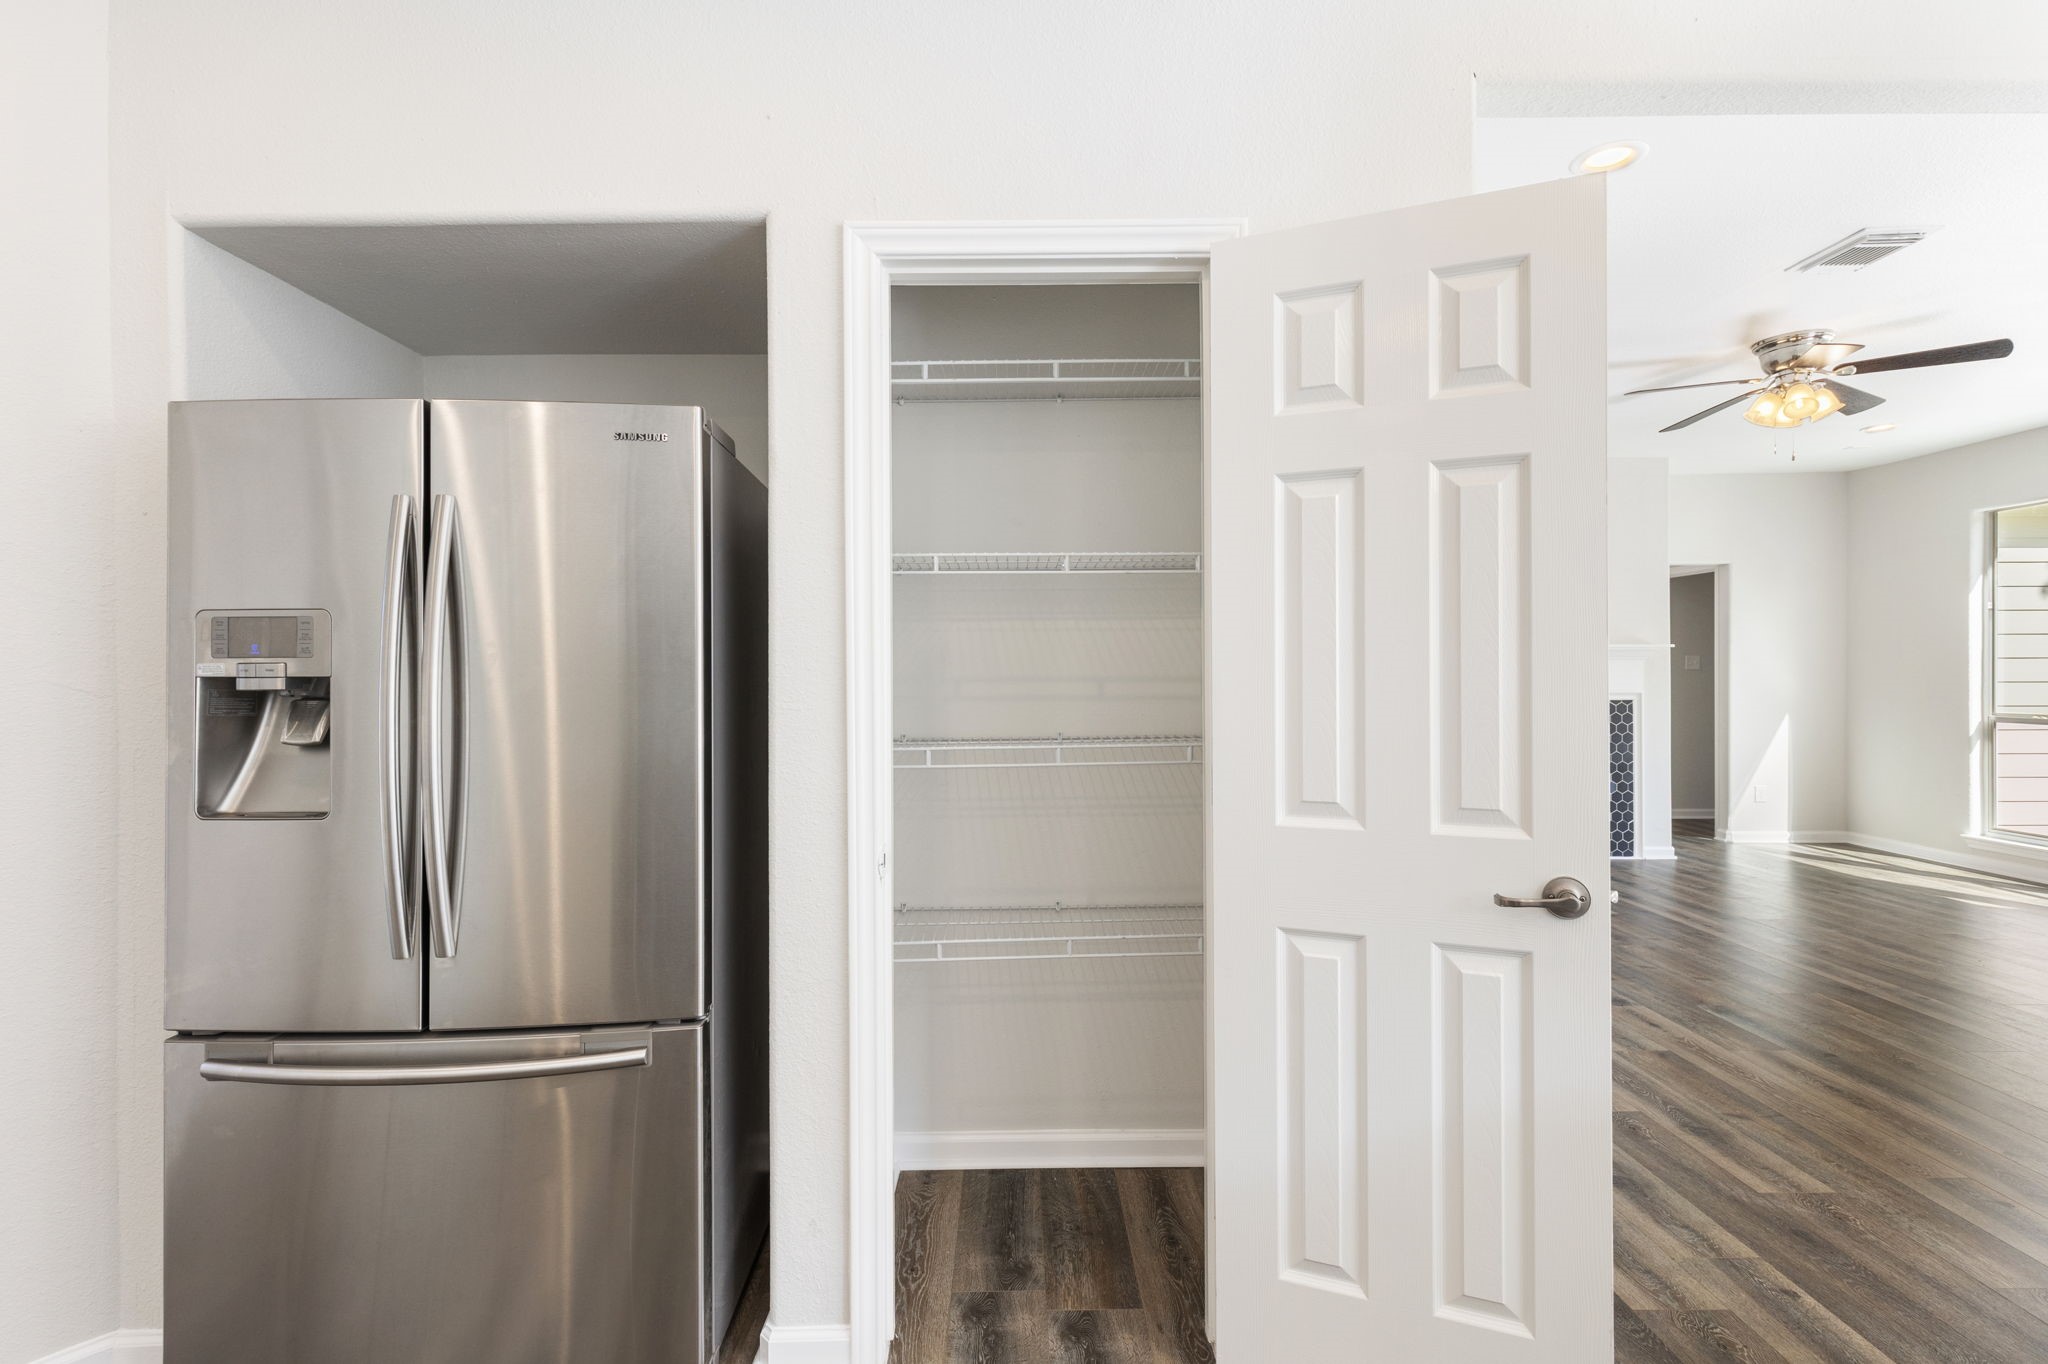 The kitchen has a pantry and double door Samsung refrigerator with water/ice dispenser that is included with the purchase of the home.